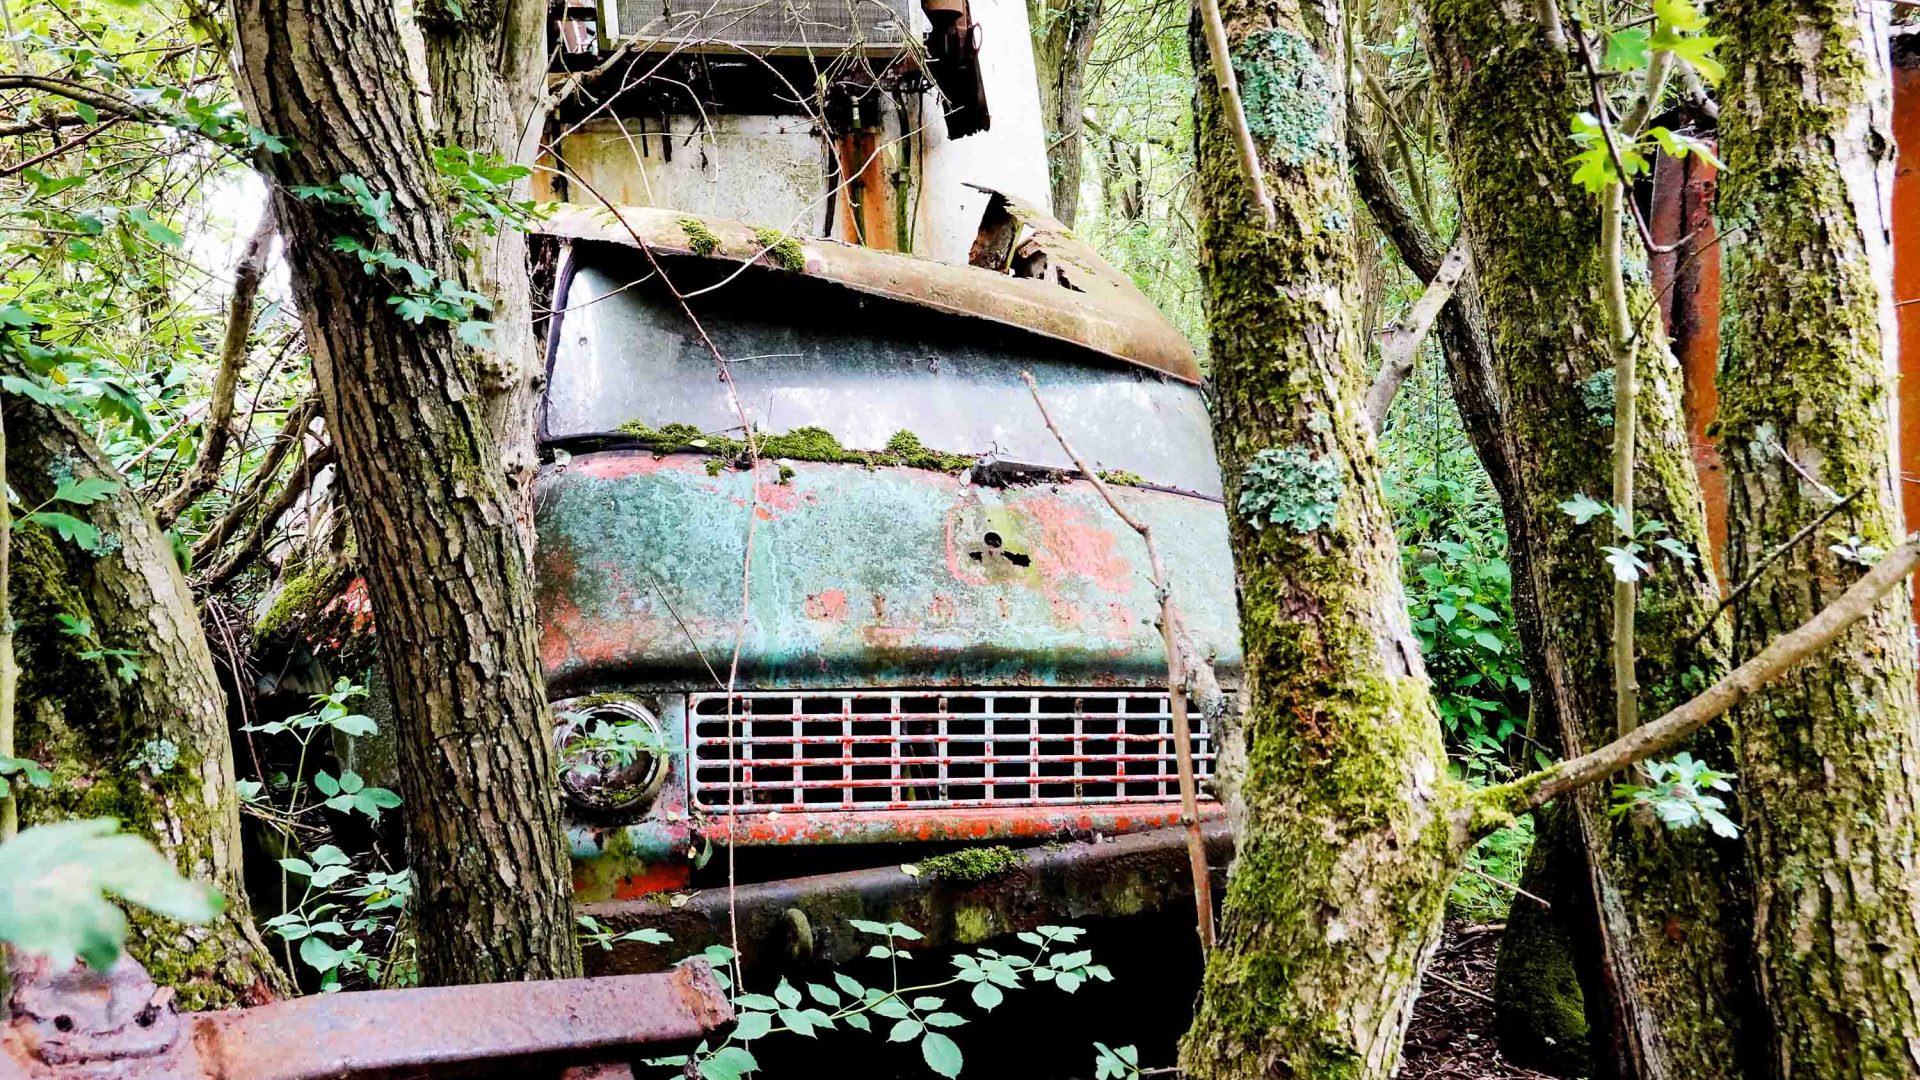 A rusty abandoned truck in amongst trees.